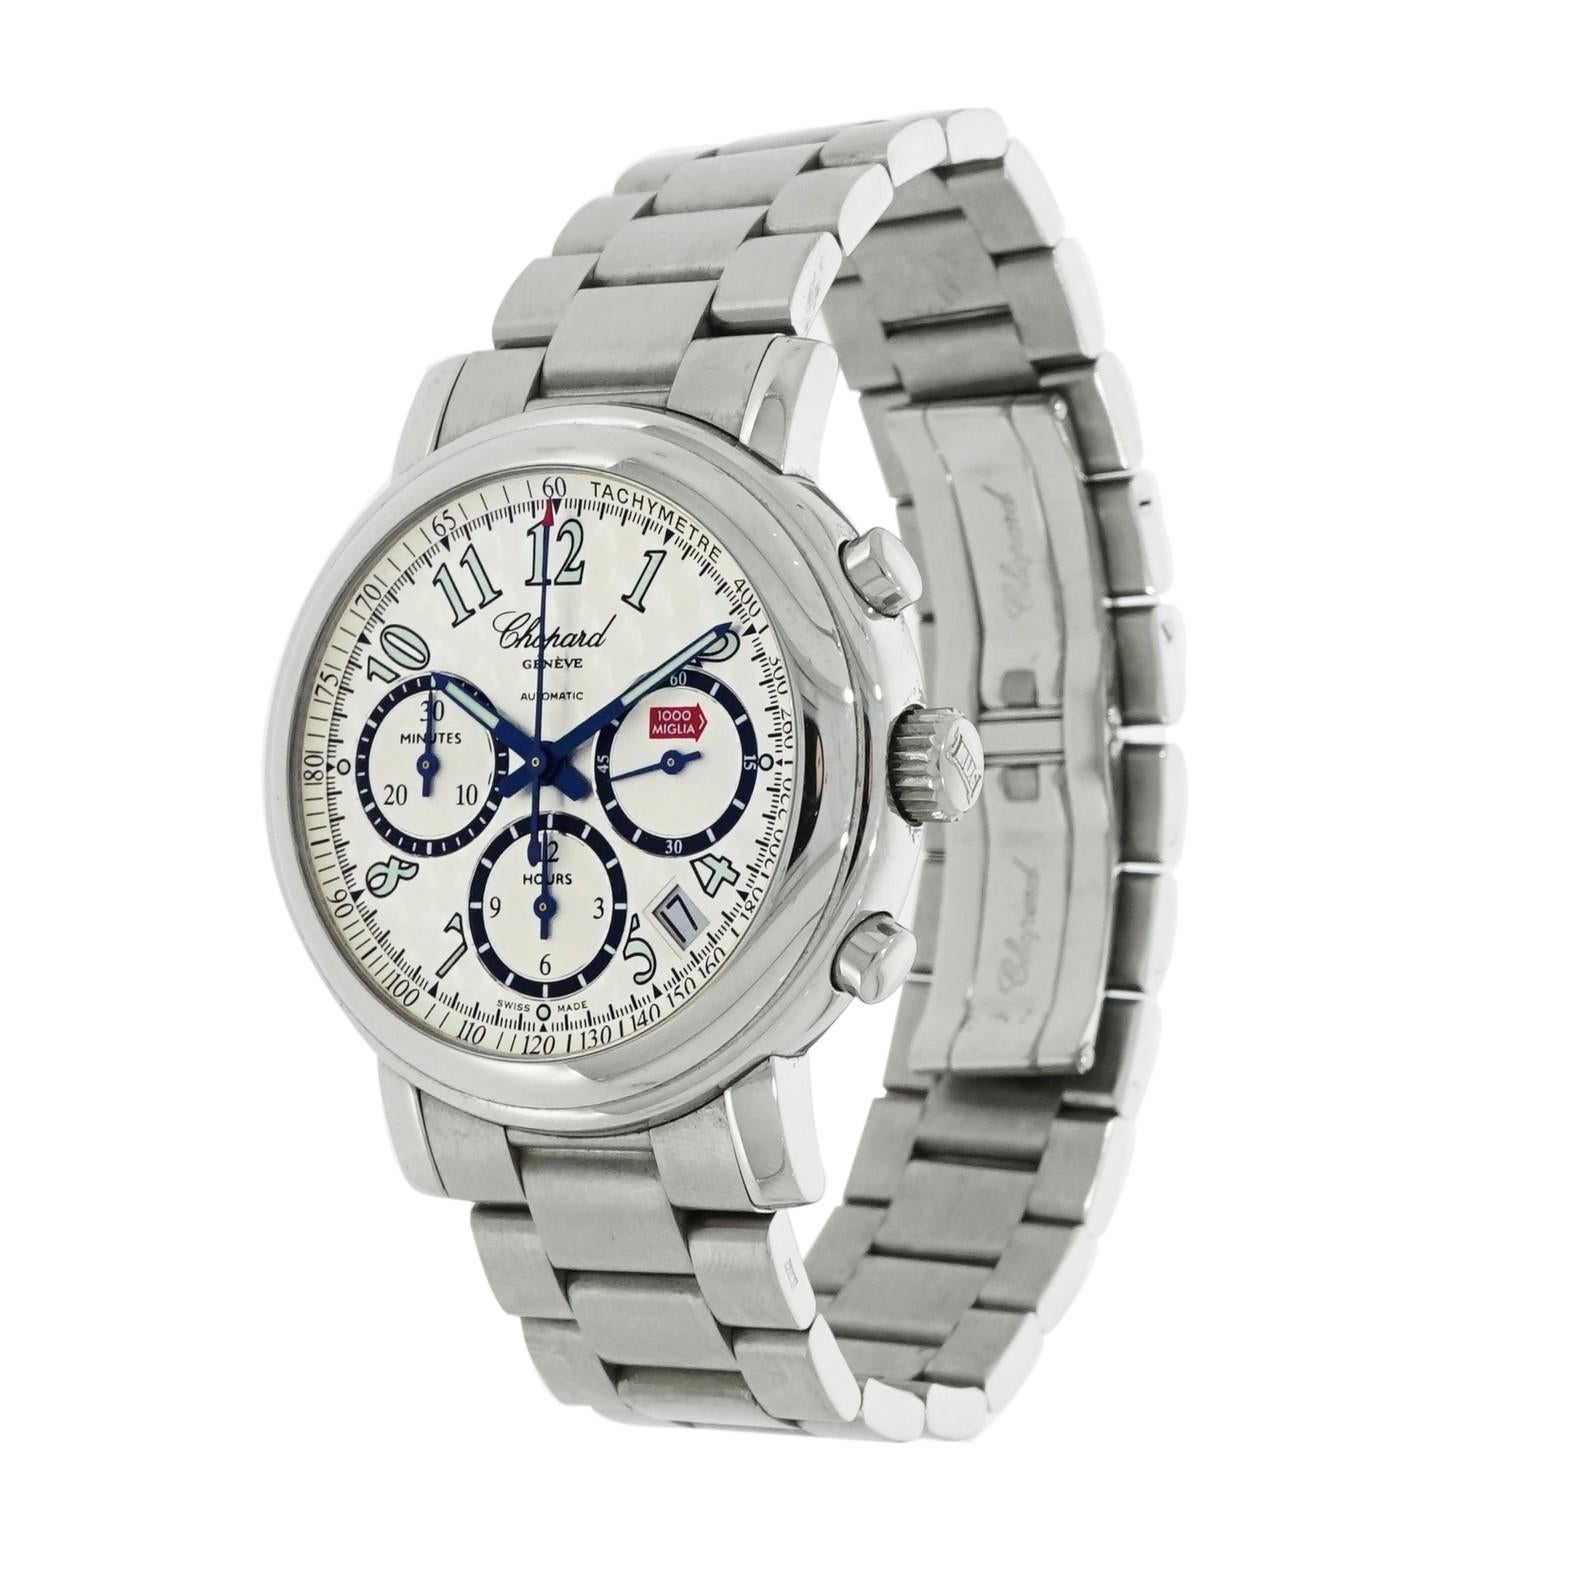 Pre-owned in very good condition Chopard Mille Miglia chronograph in stainless steel 39 mm case, automatic self-winding movement, 37 jewels, beating at 28,800 vph, 40 hours of power reserve, silver grey engined turned dial with luminous  Arabic